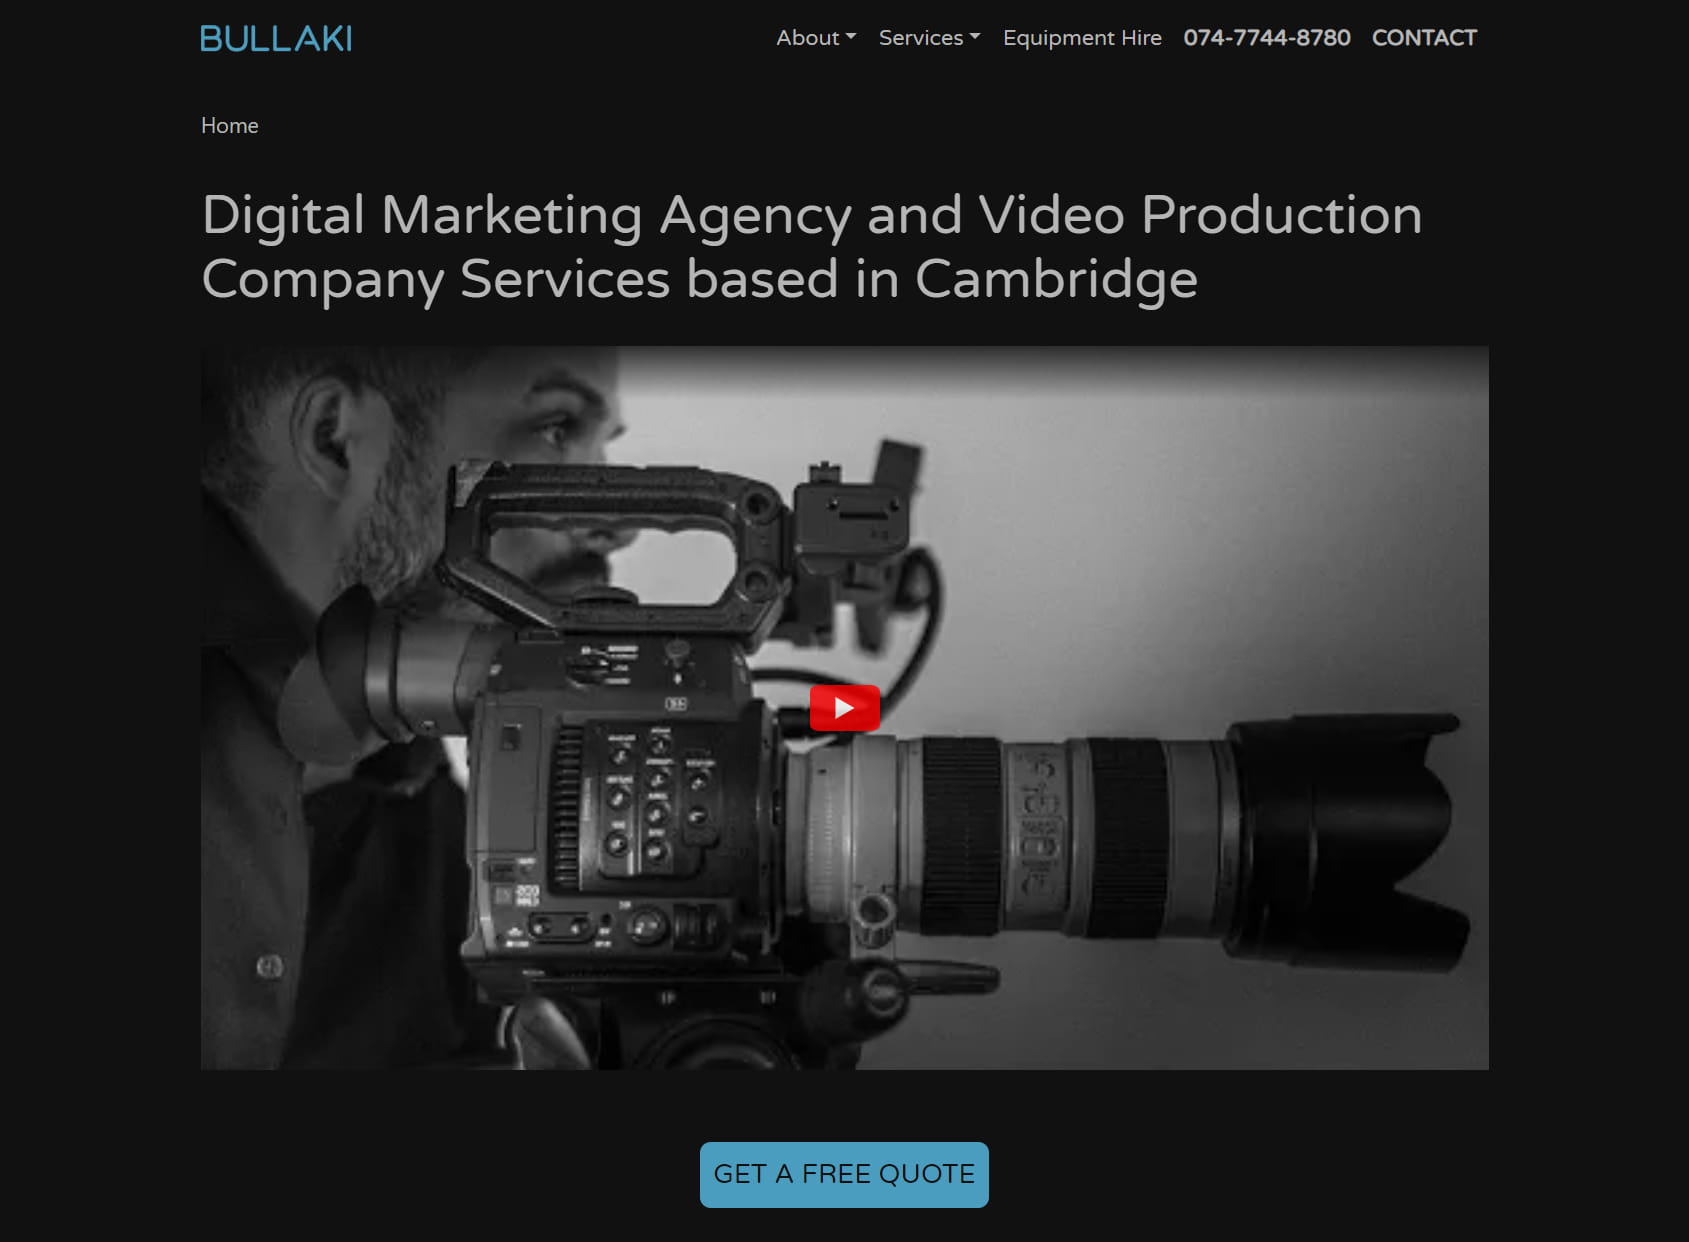 Digital Marketing Agency and Video Production Company Services